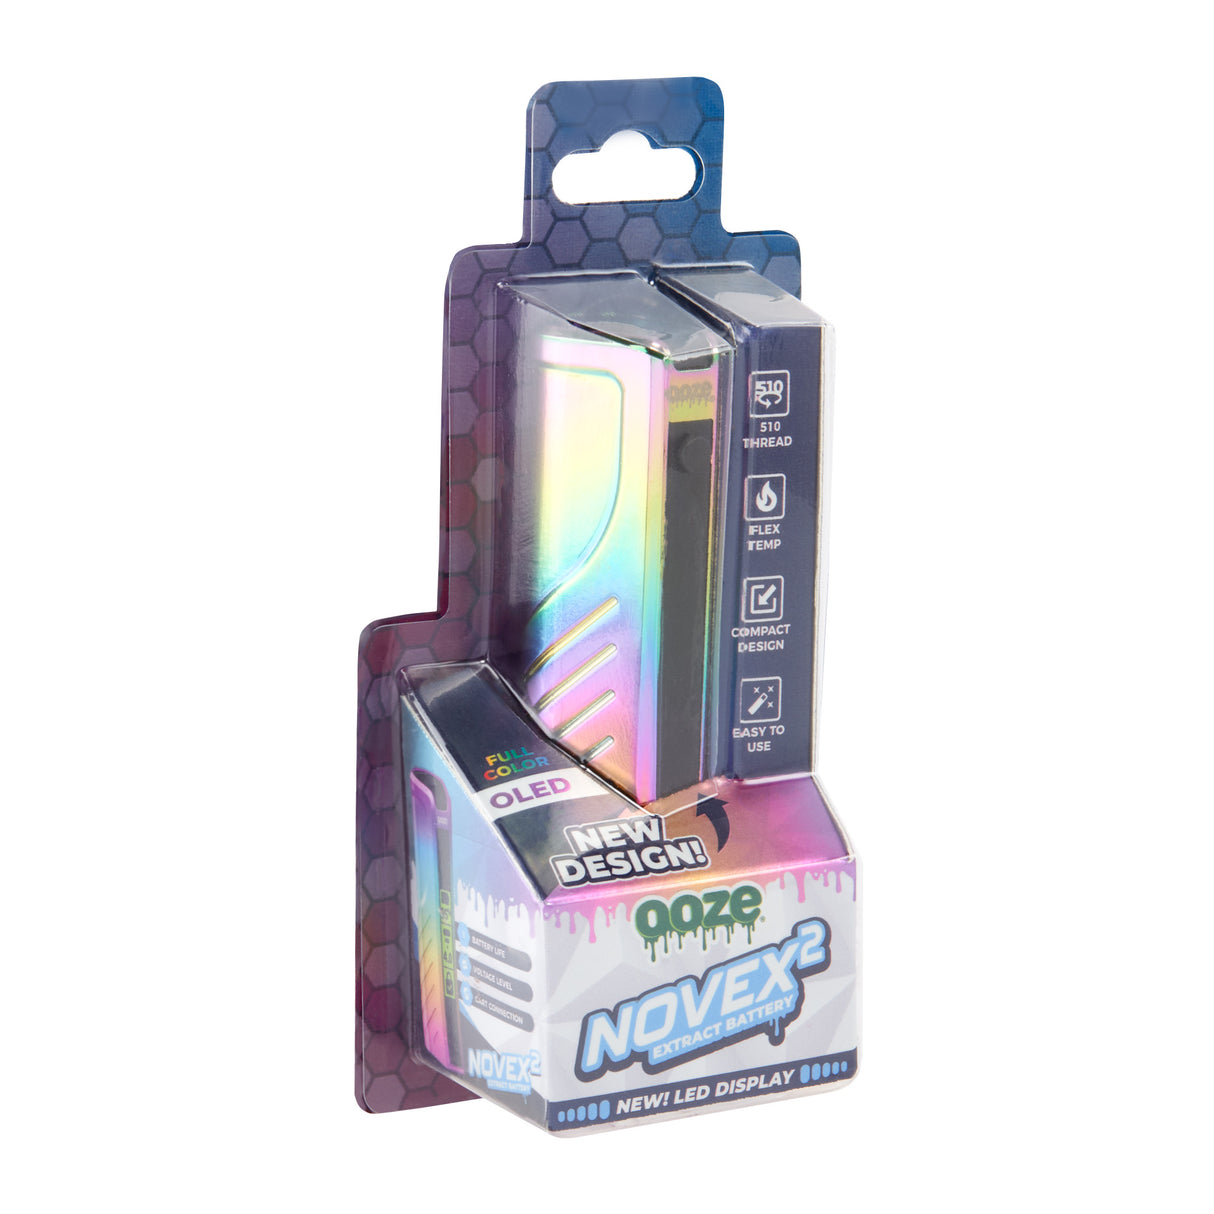 The rainbow Ooze Novex 2 is in the original packaging, shown on an angle